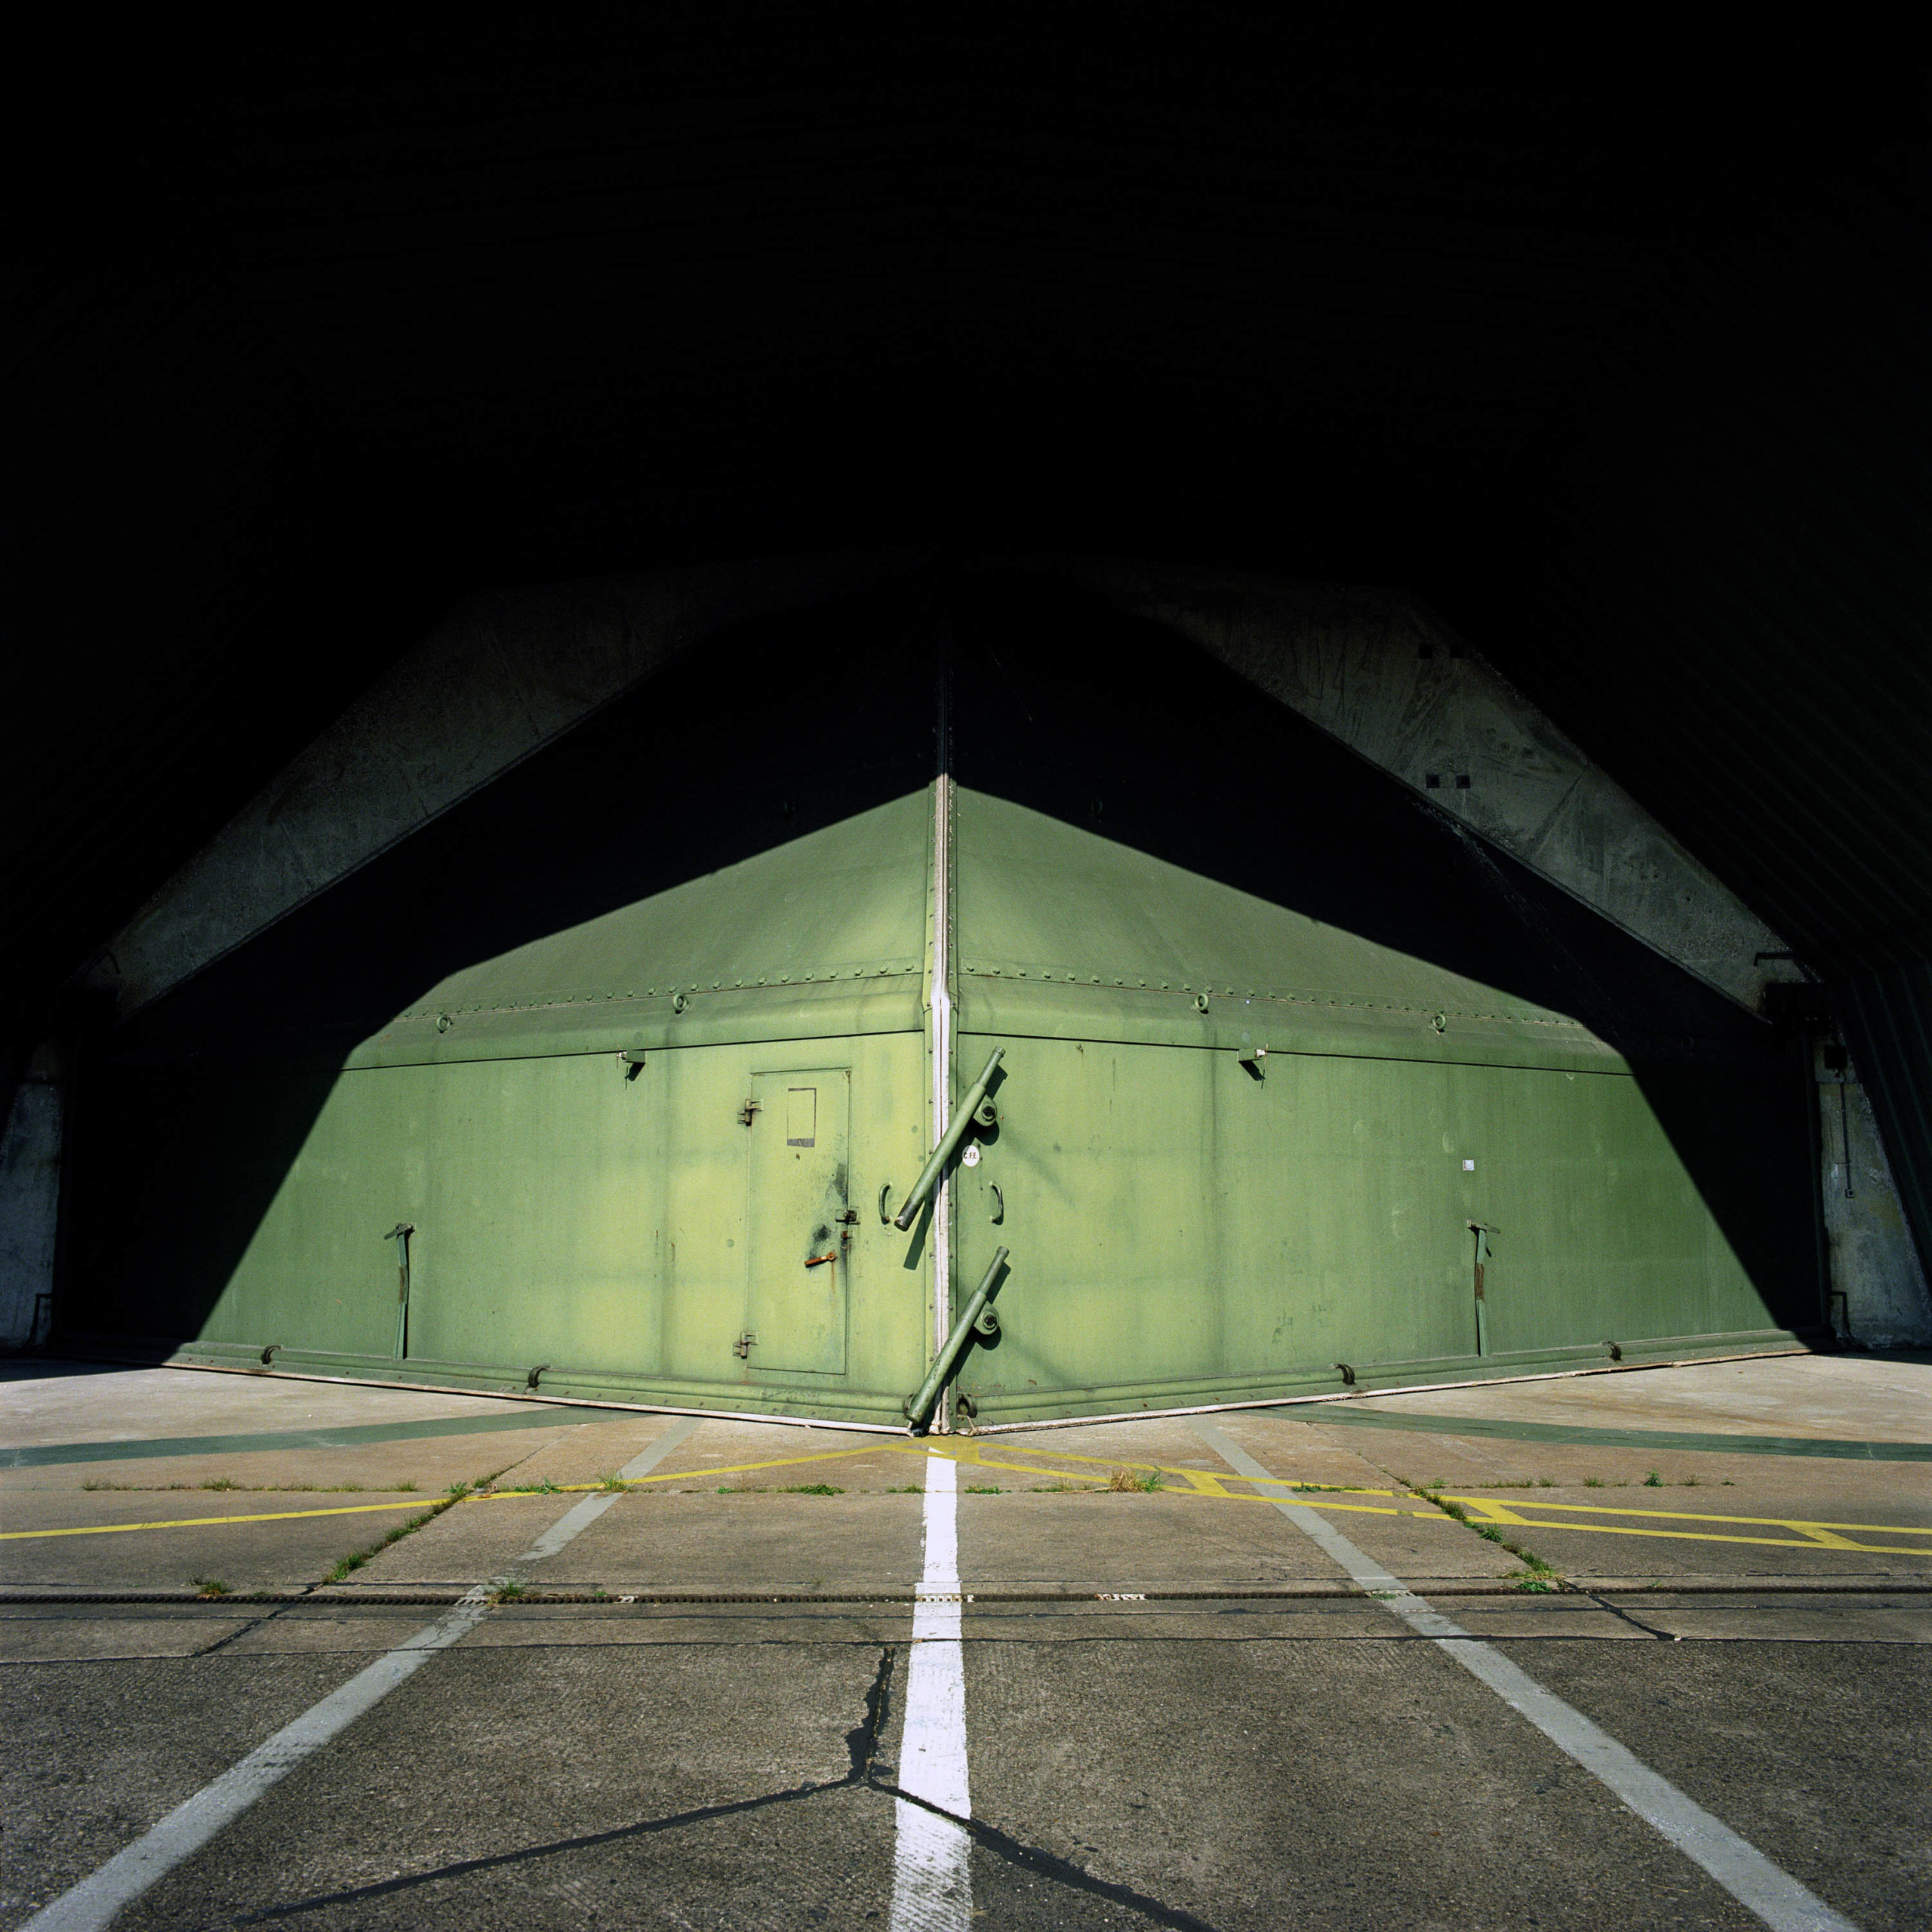 West Germany. Airplane shelter at a British Royal Air Force base